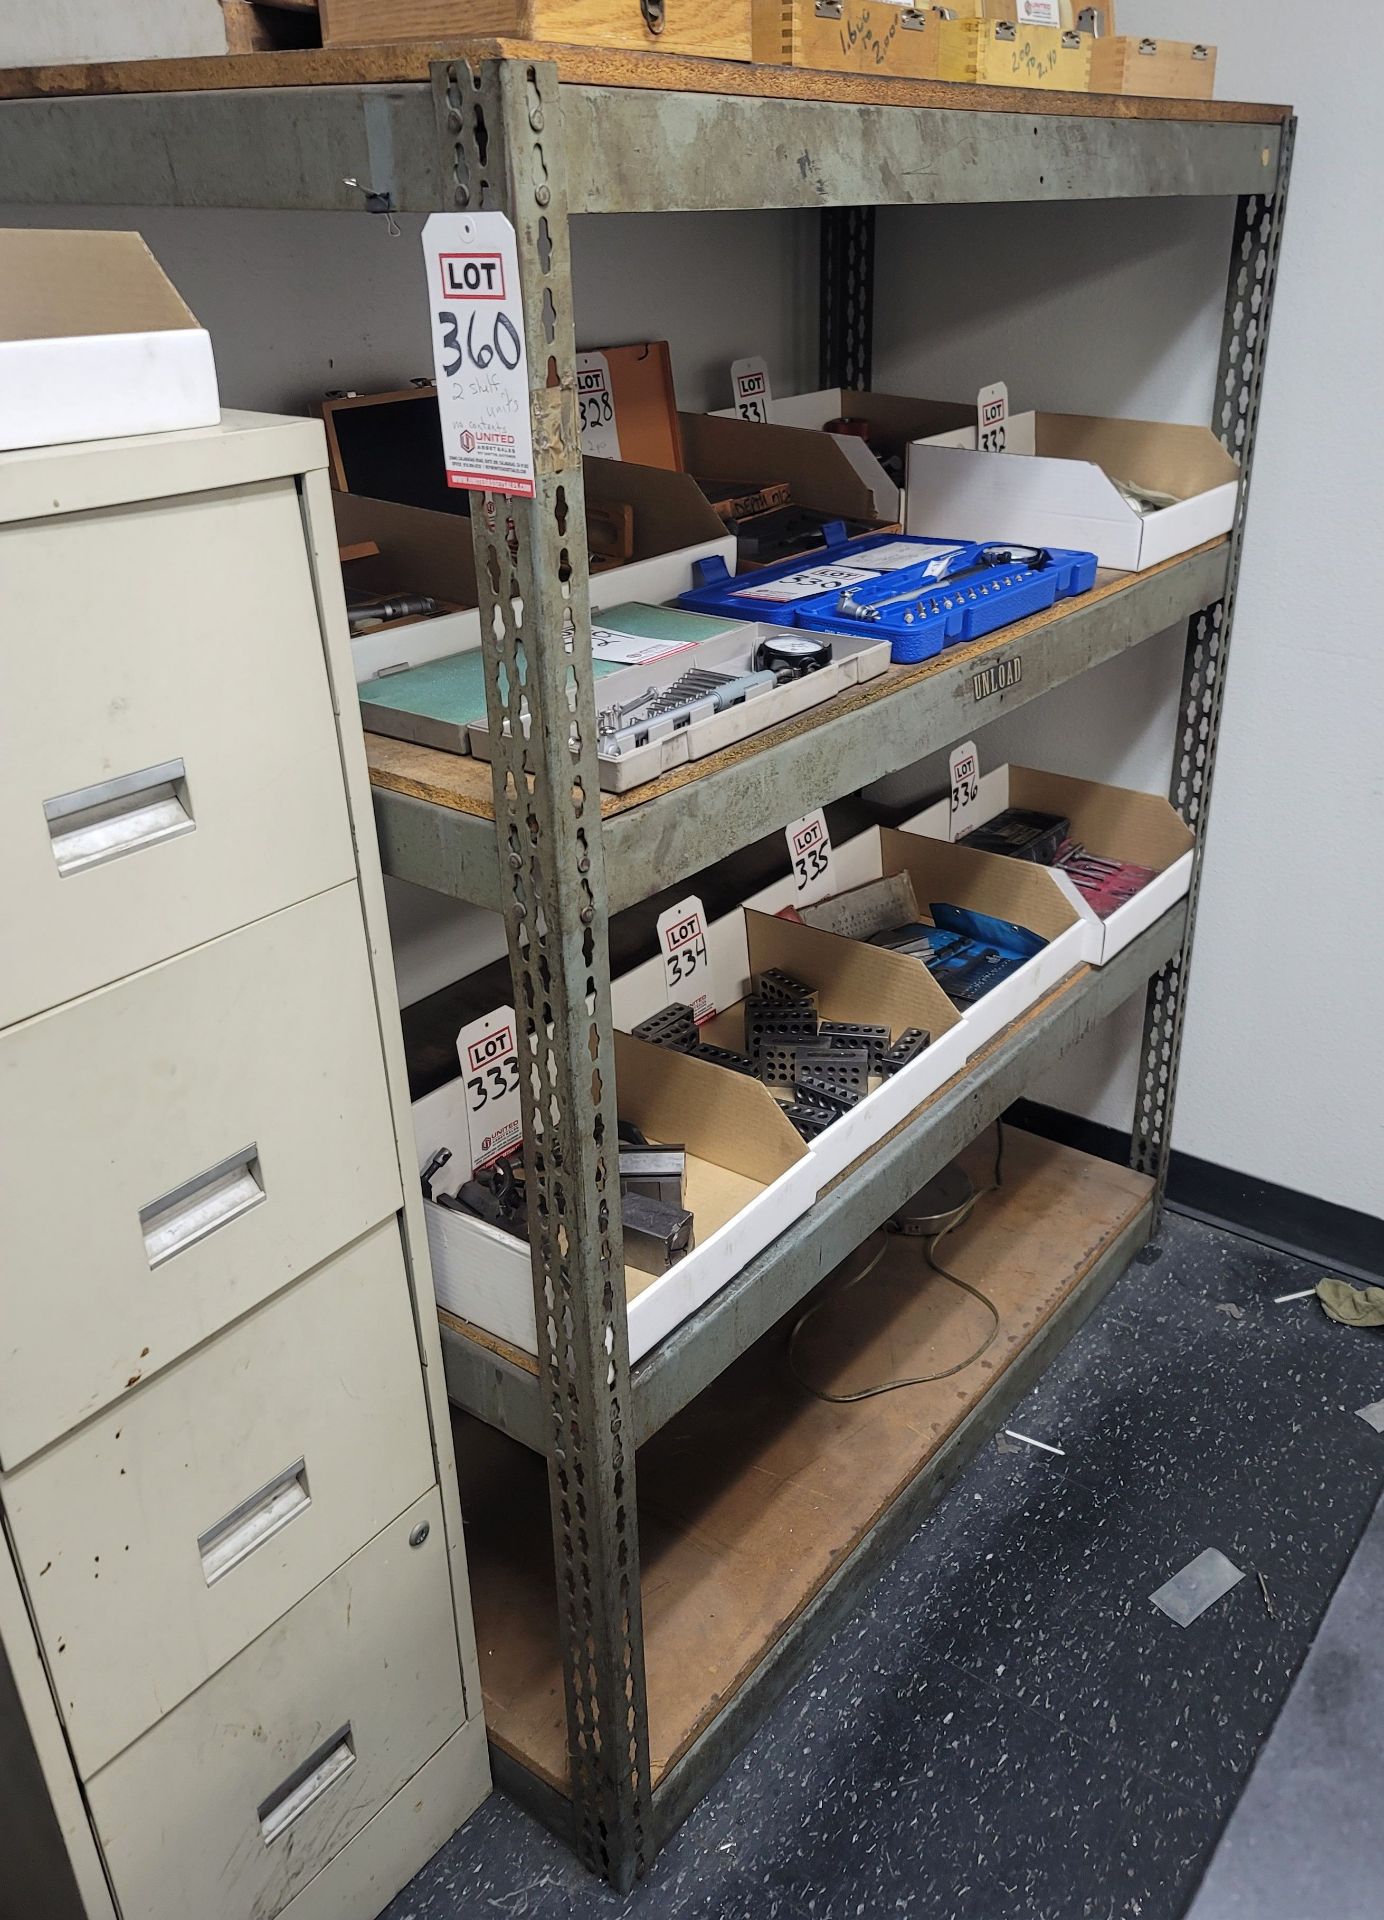 LOT - (2) STEEL SHELF UNITS W/ PARTICLE BOARD SHELVES, 4' X 2' X 5' HT, CONTENTS NOT INCLUDED